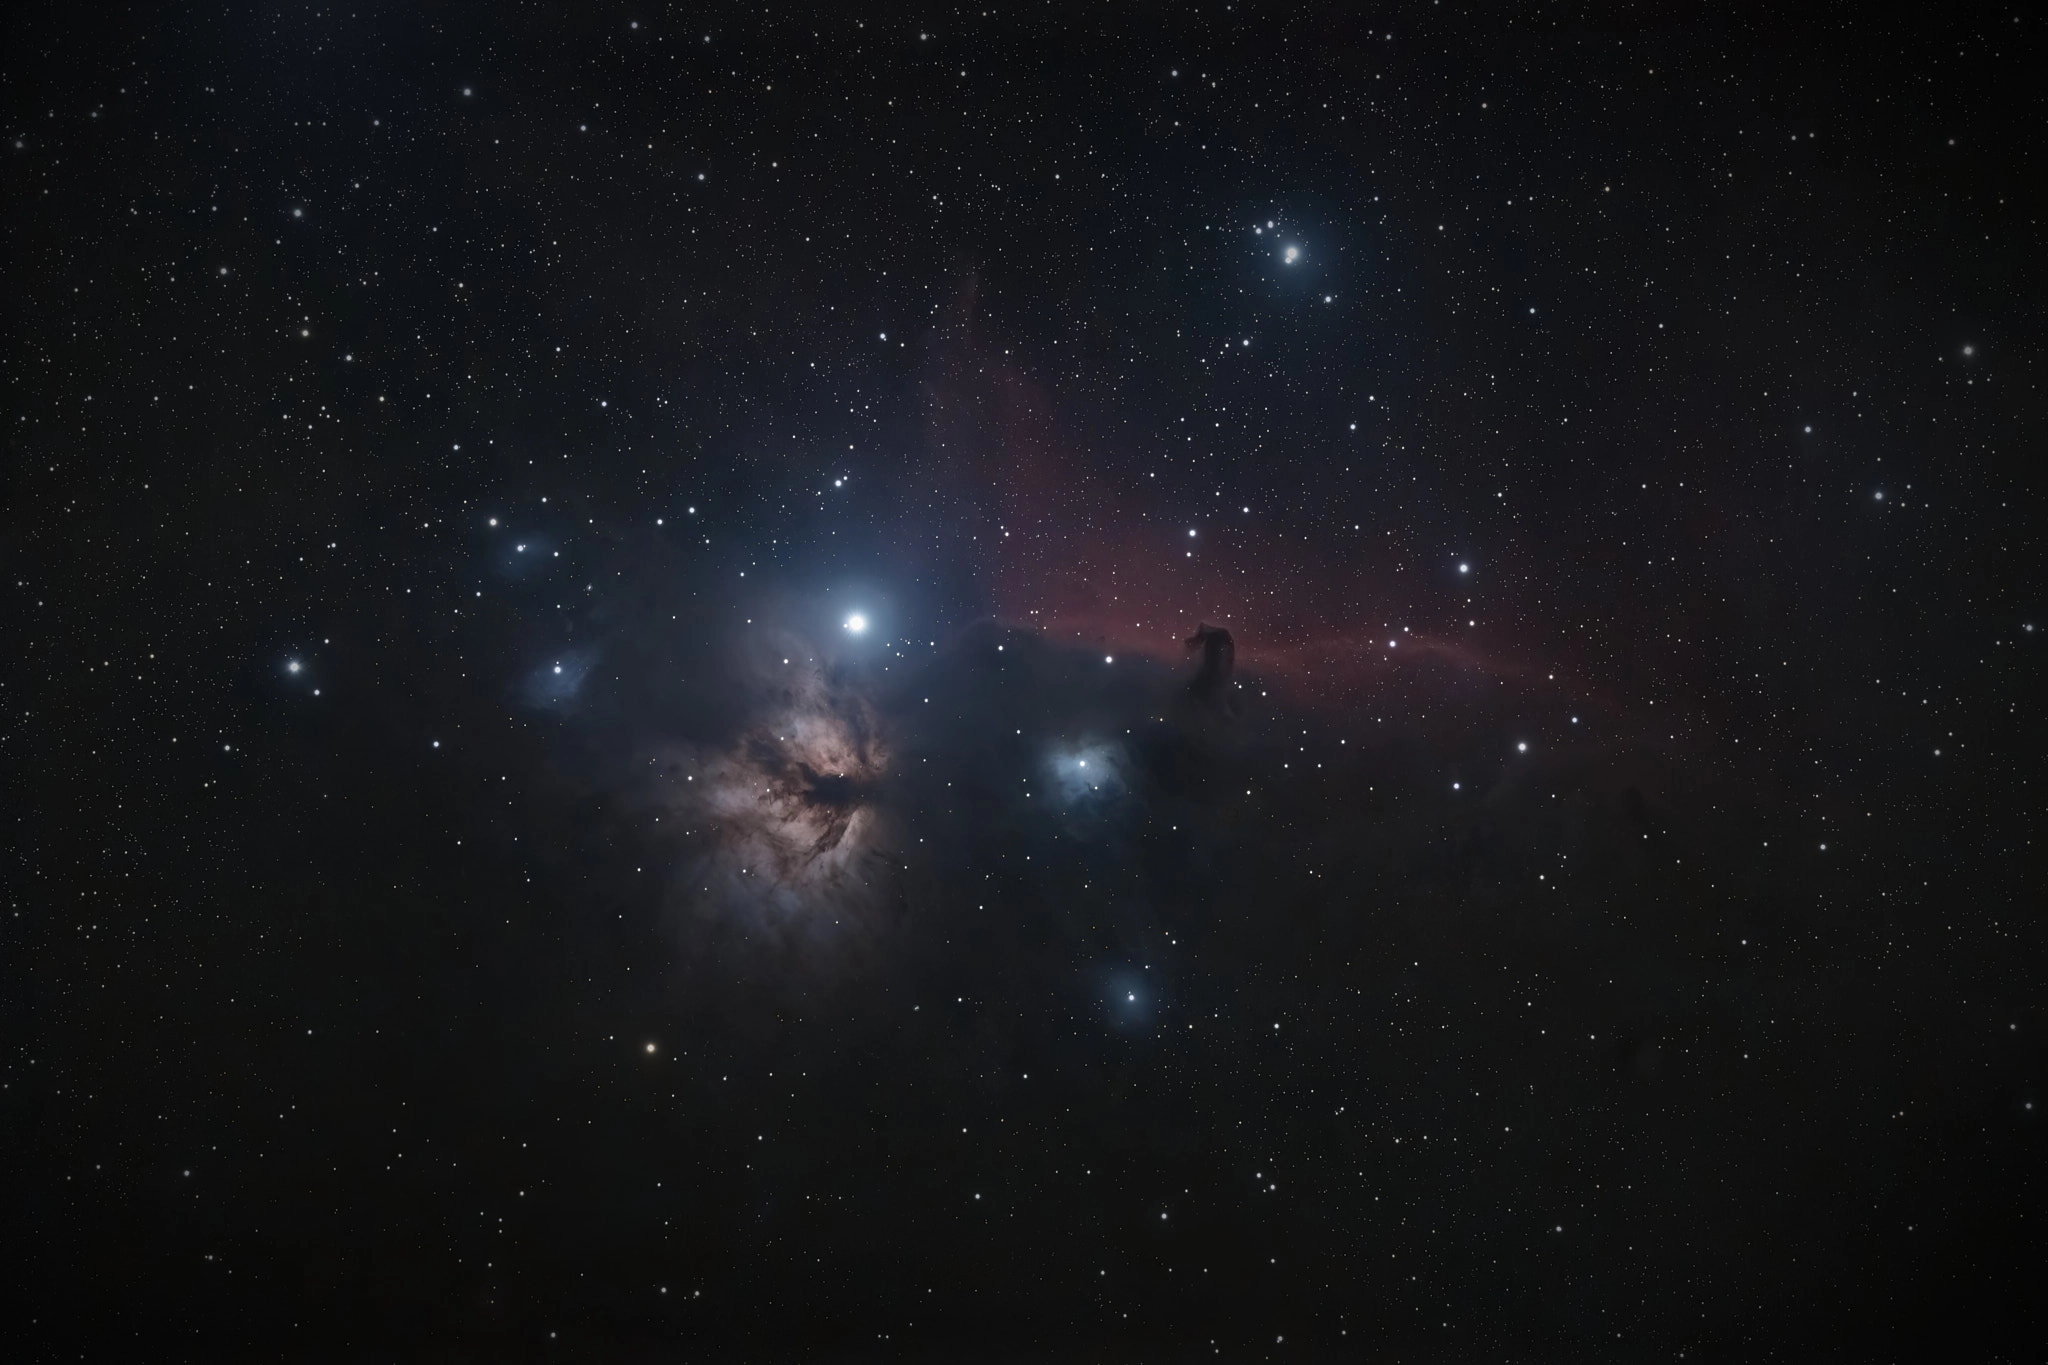 A dark cloud in the shape of a horse’s head set again a lane of red dust, with a bright start to its left. Below that bright star in the frame is the Flame Nebula, dark tendrils against a light orange/brown cloud reminiscent of flame.